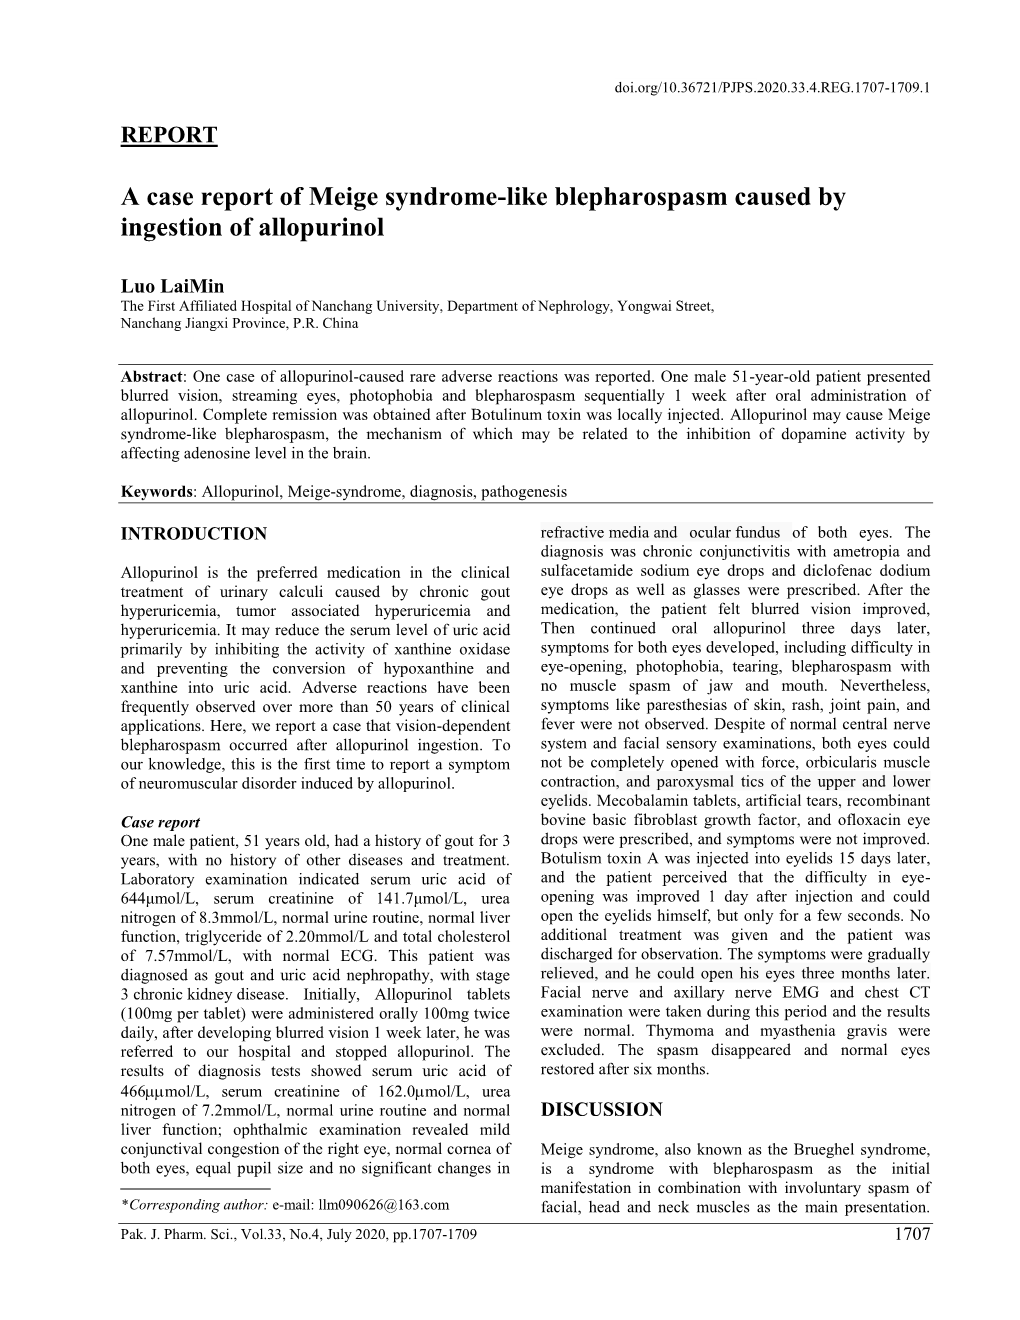 A Case Report of Meige Syndrome-Like Blepharospasm Caused by Ingestion of Allopurinol